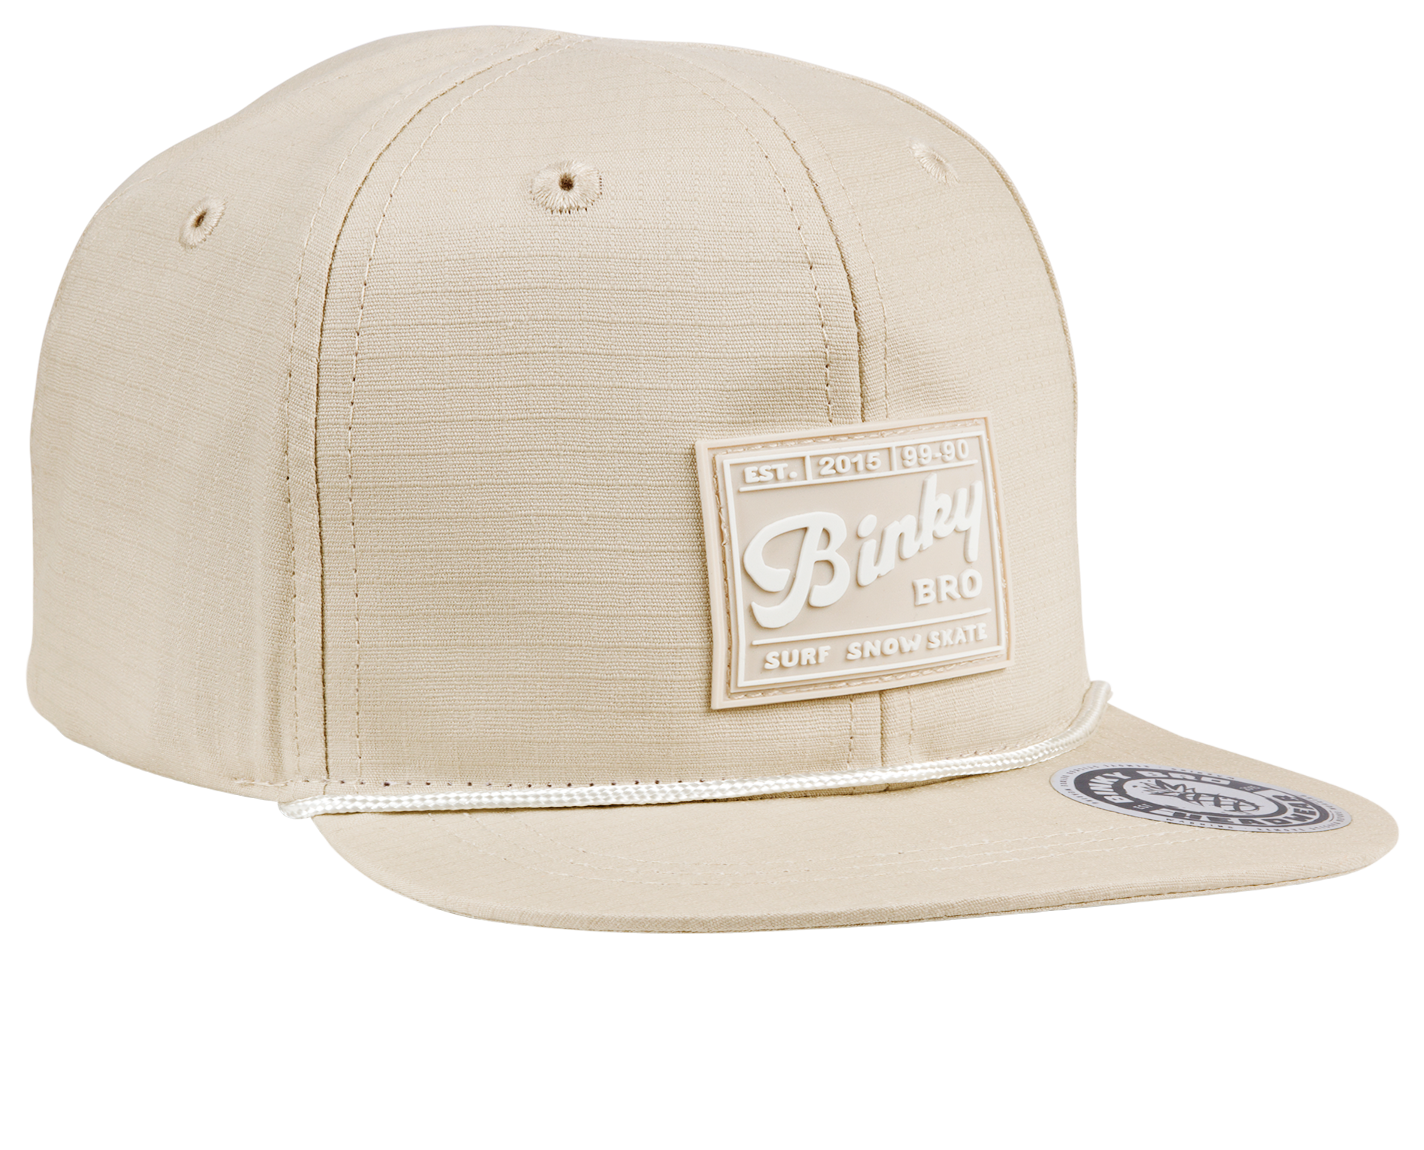 Byron Bay Hat: Youth (3 years - 6 years) / Beige / Standard Fit